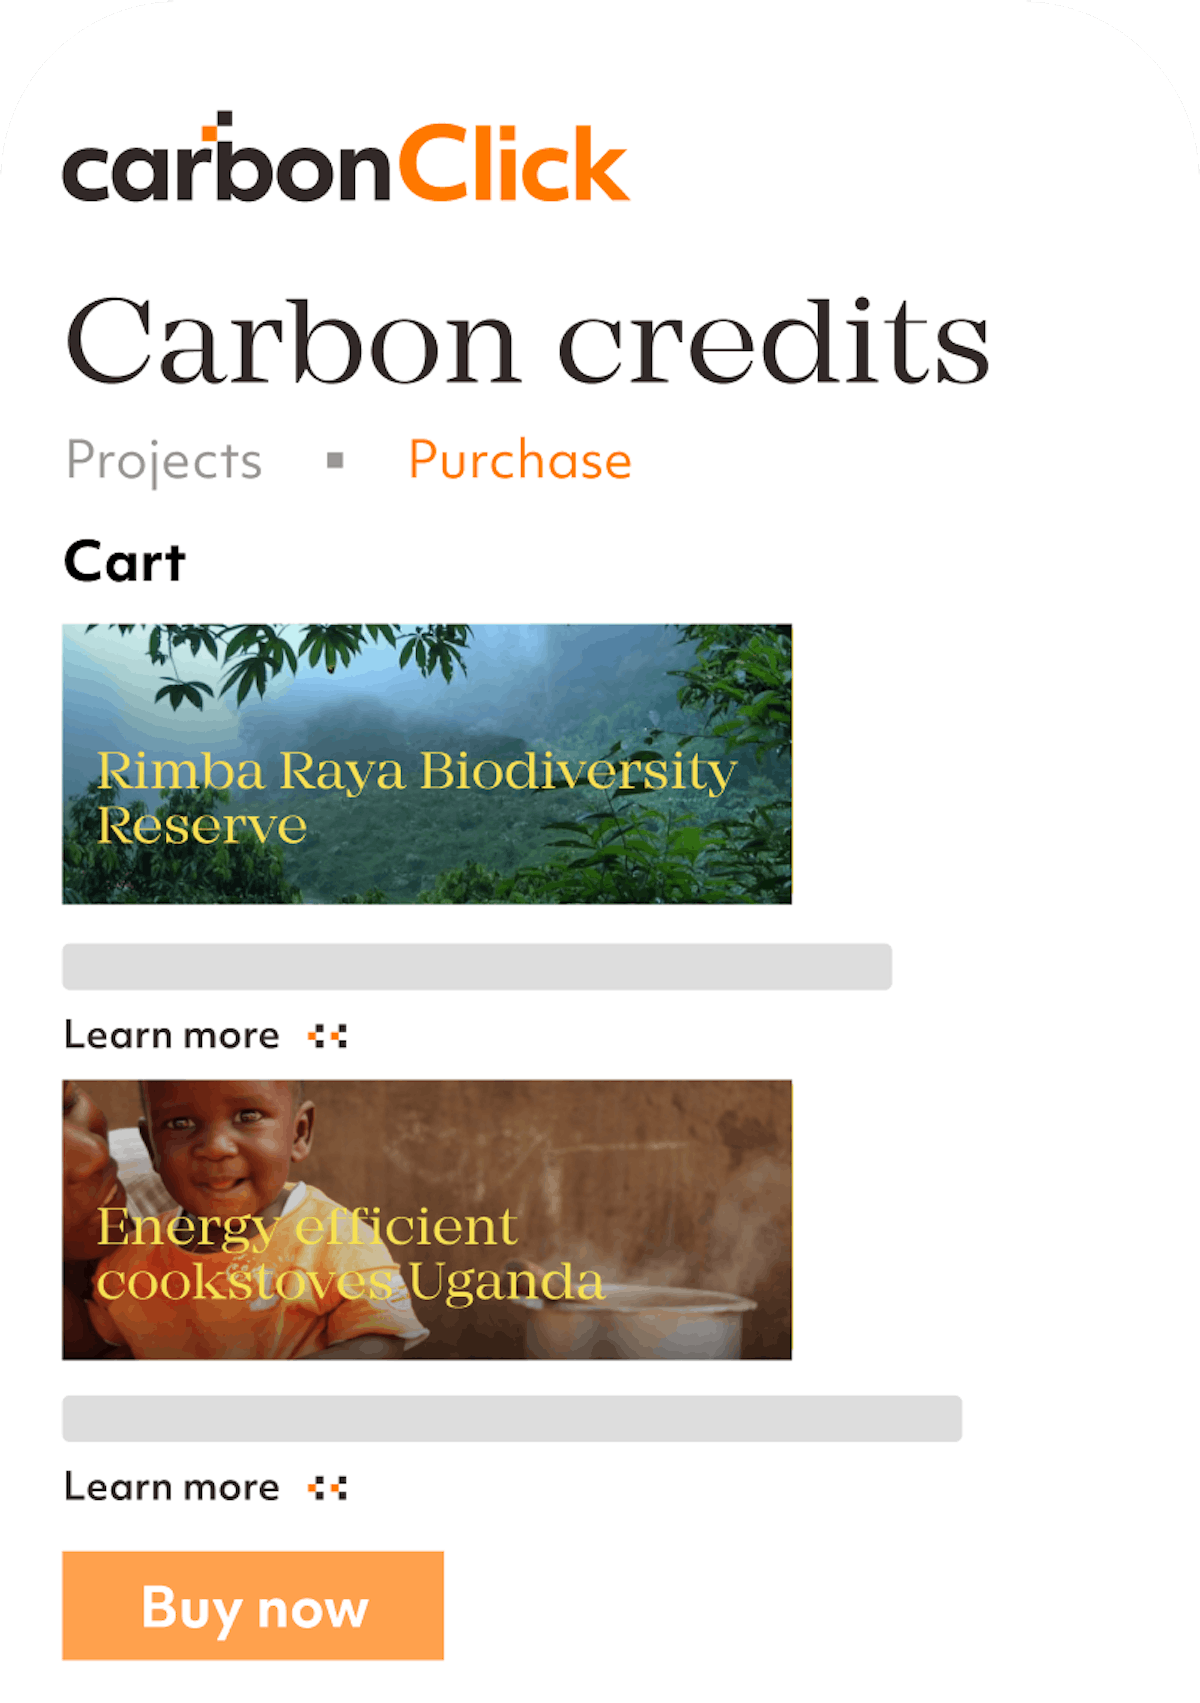 Eco-Friendly Carbon Solutions from CarbonClick. 